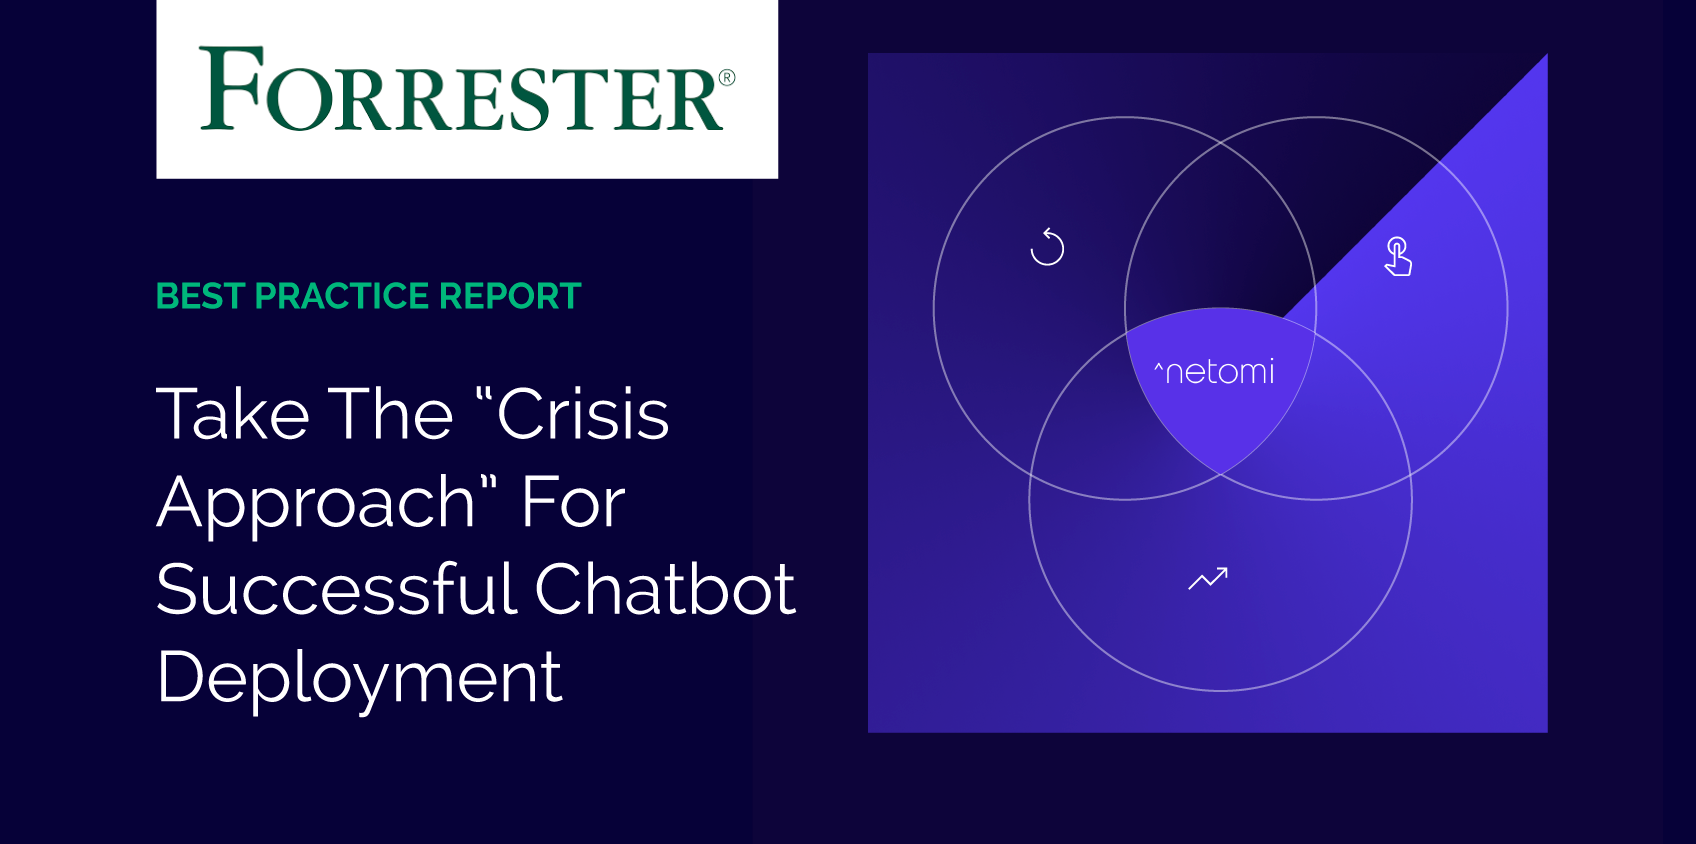 Netomi’s Framework Is In the Center of Forrester’s Take the “Crisis Approach” For Successful Chatbot Deployment Report.